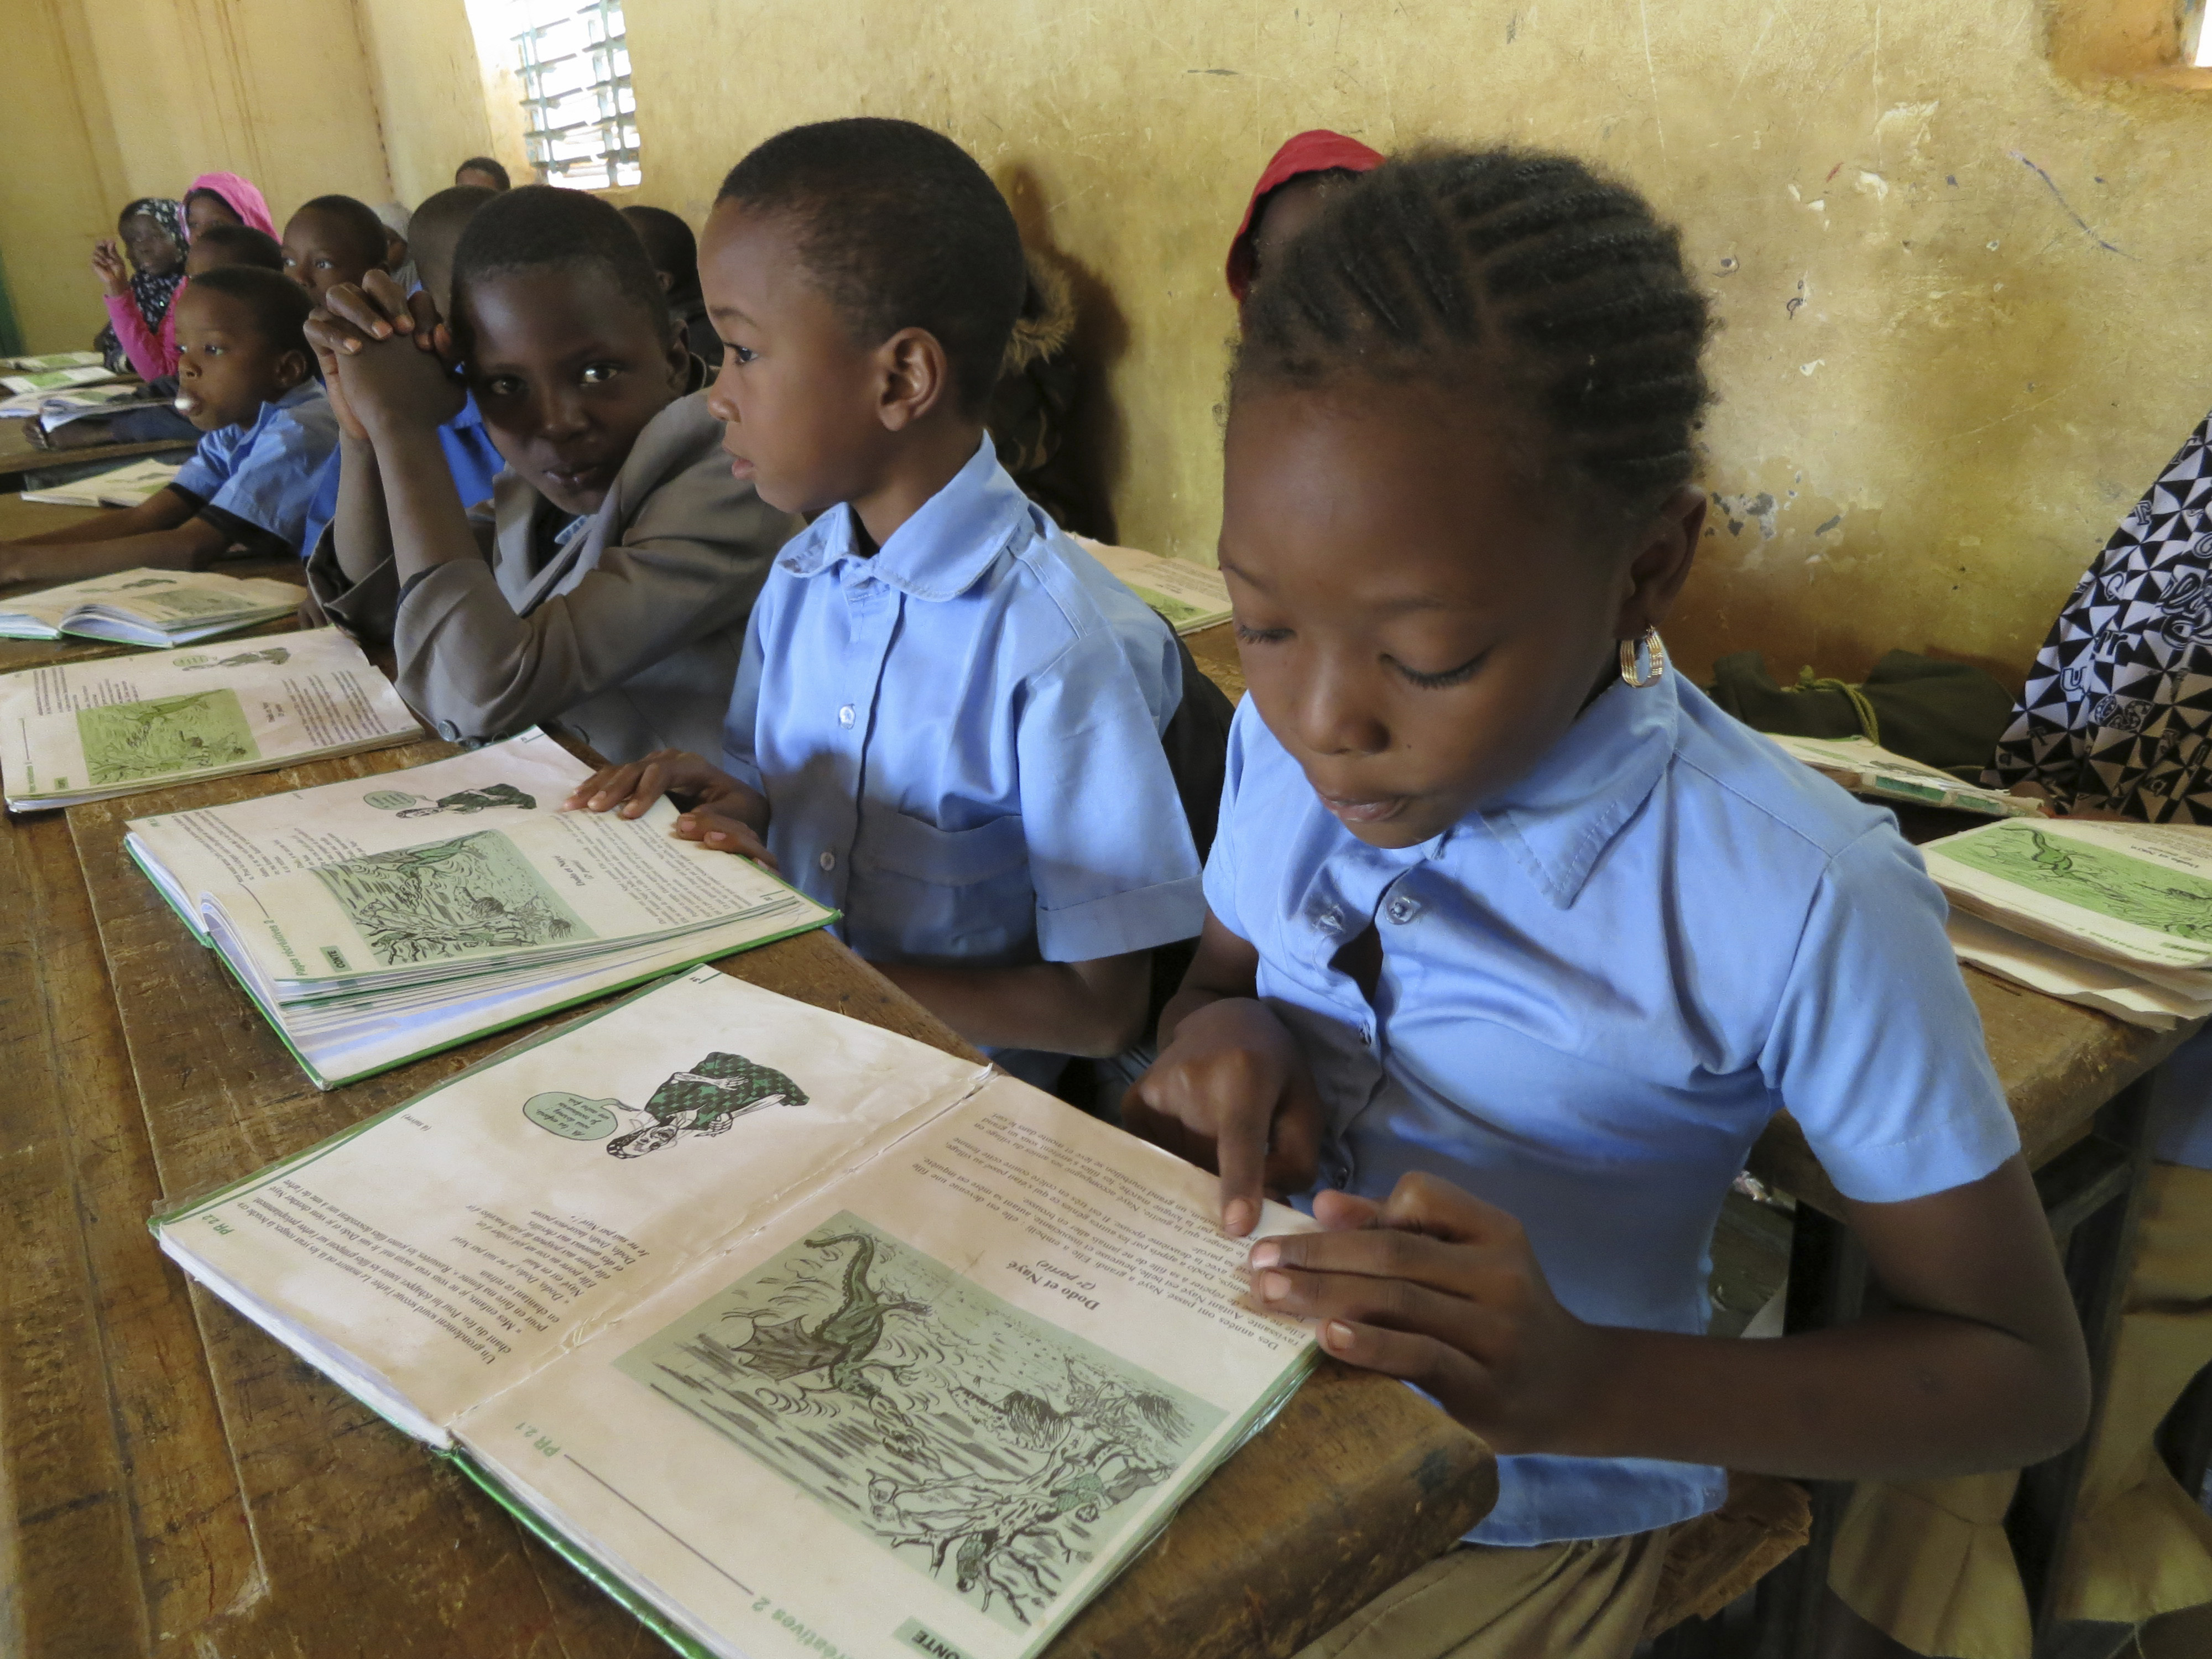 Students reading in school books at a Nigerian school on December 09, 2013, in Niamey, Niger. (Ute Grabowsky—Photothek via Getty Images)